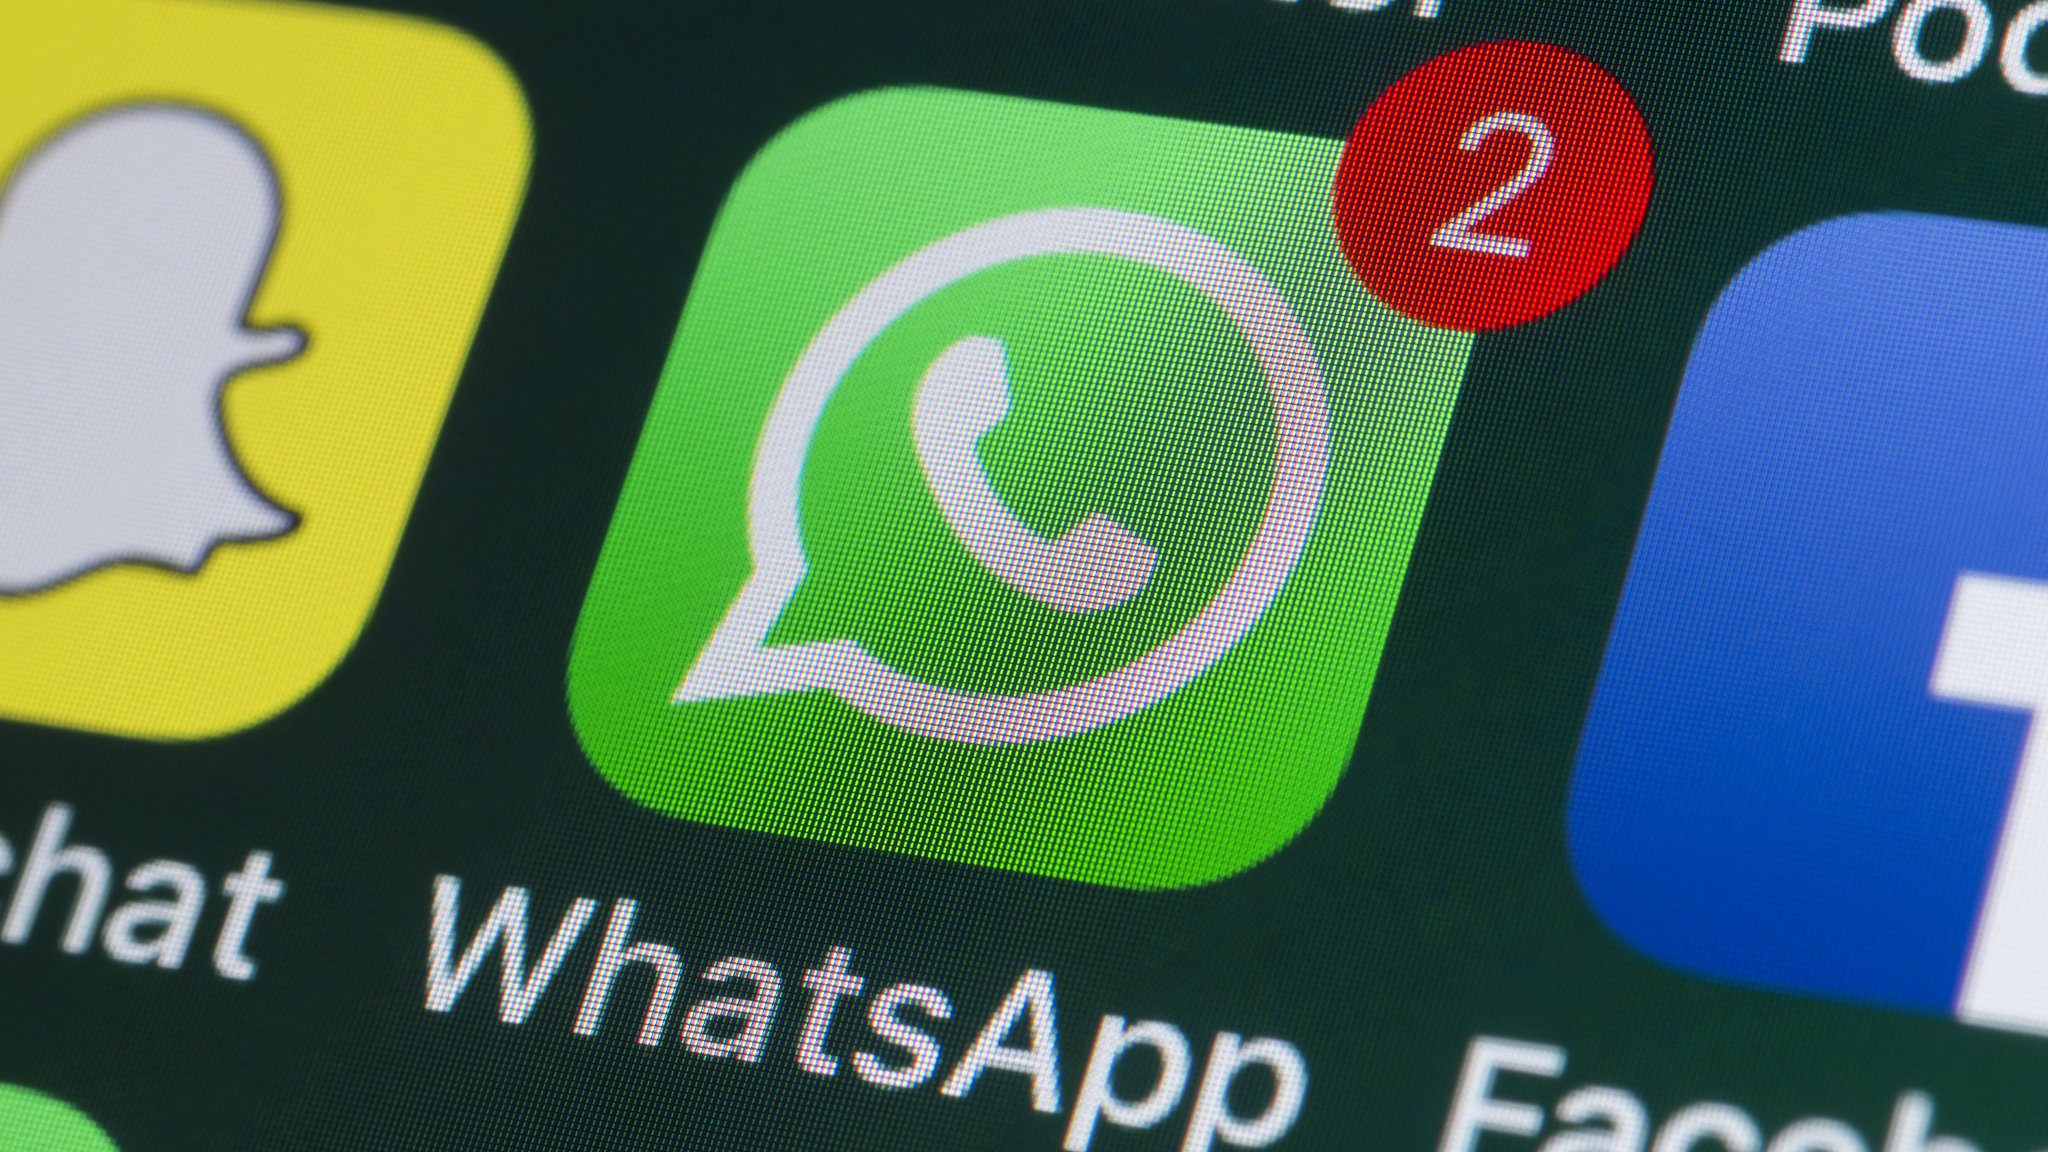 WhatsApp to stop working on millions of phones - BBC News